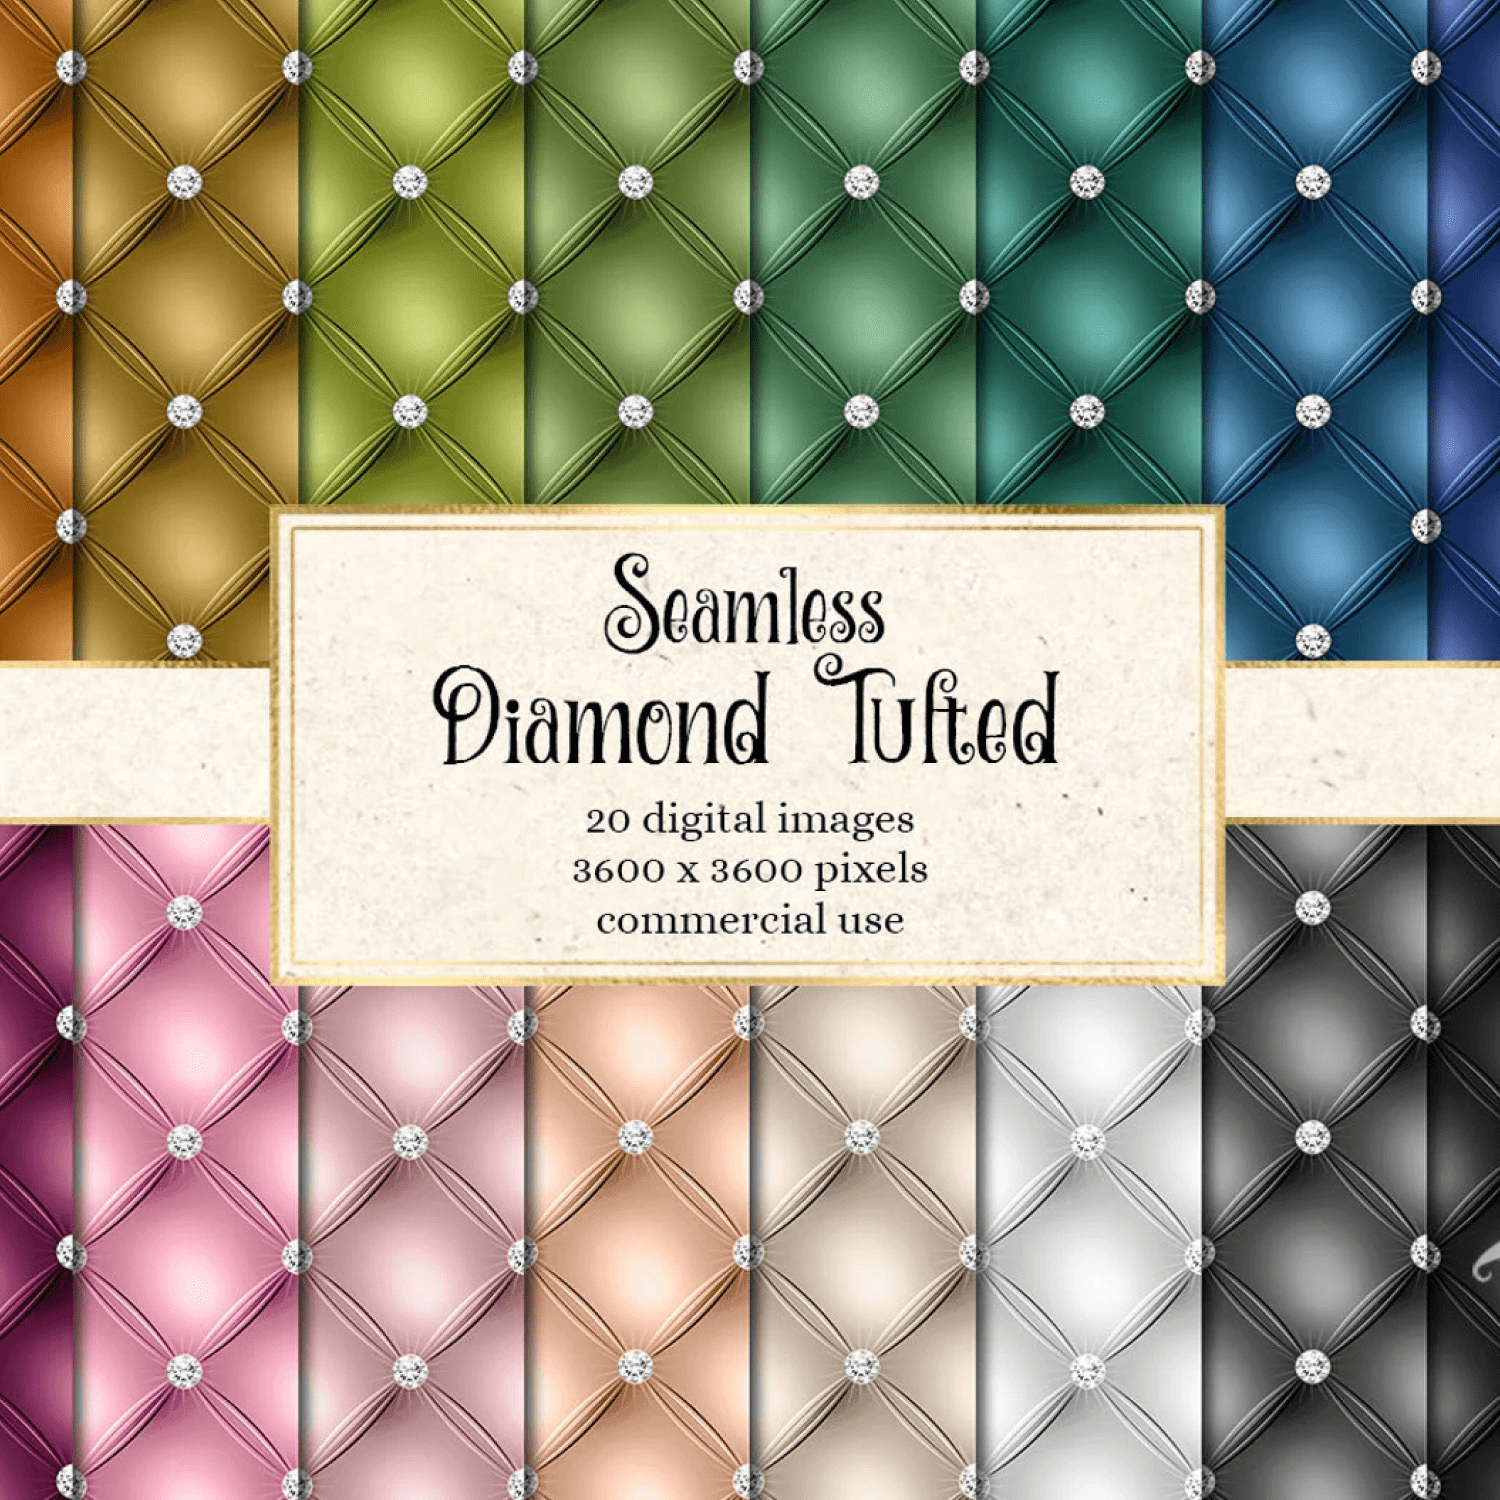 Diamond Tufted Digital Paper - Luxury Quilted backgrounds.